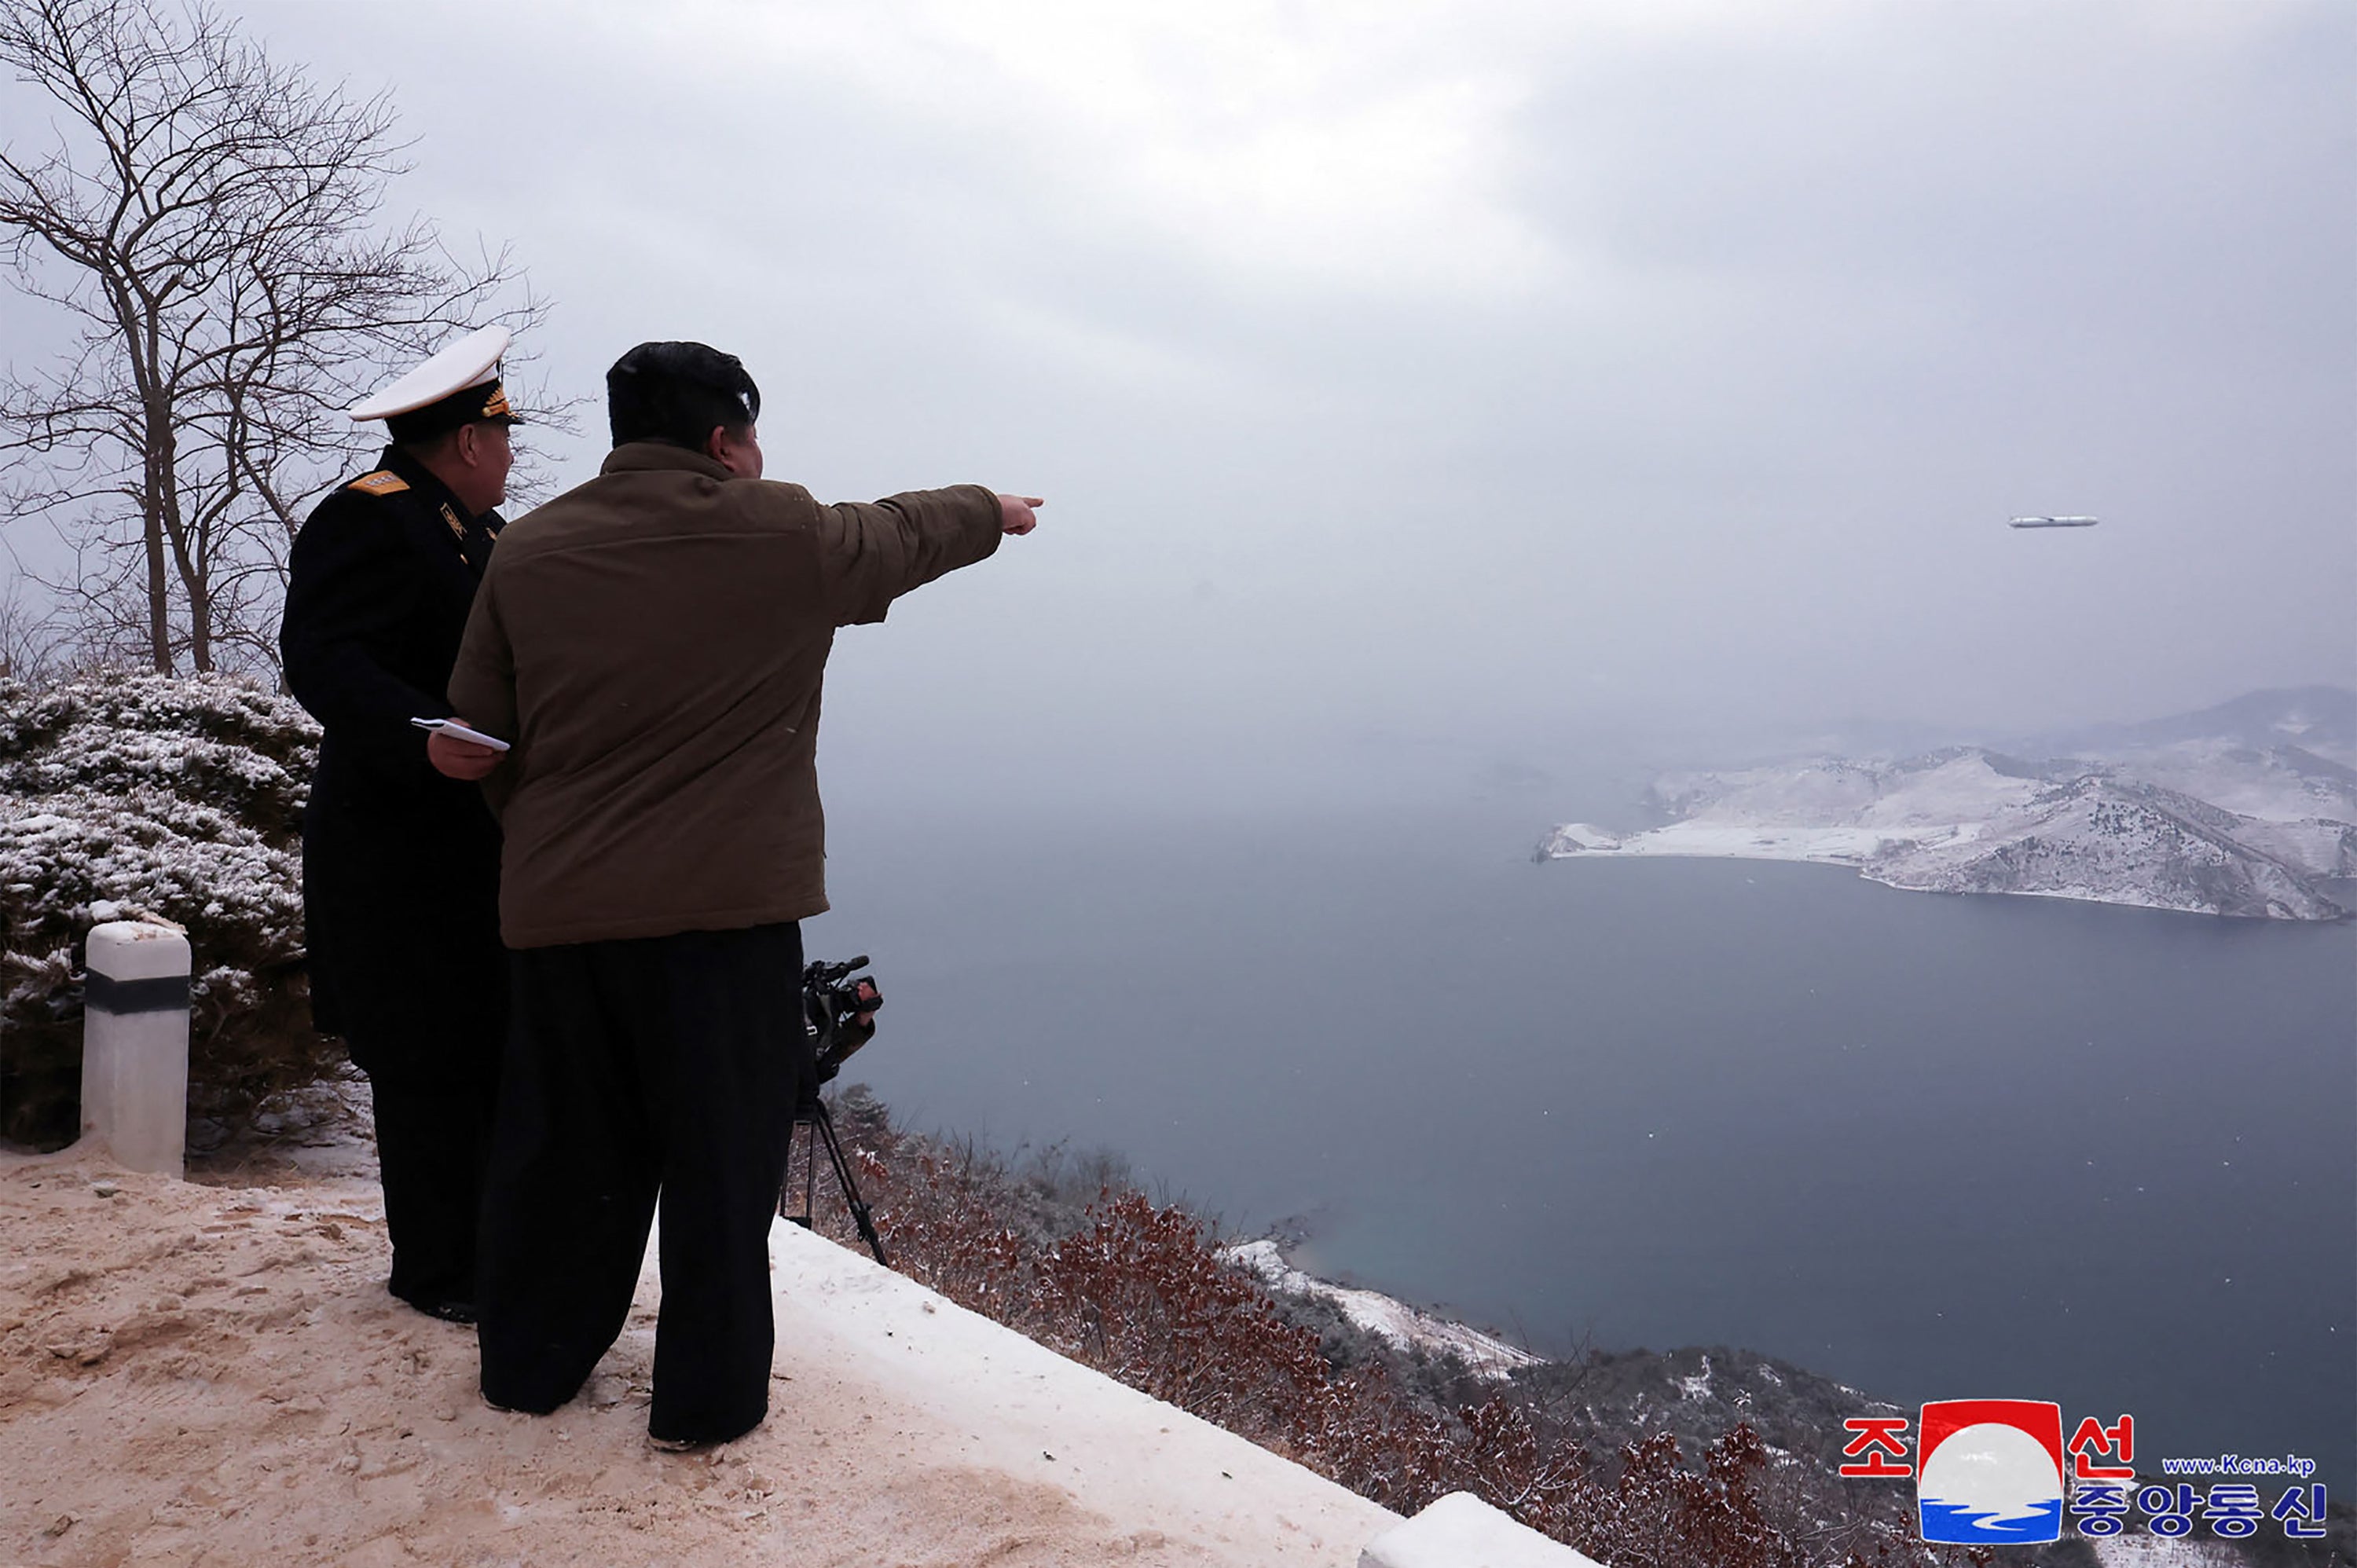 kim jong-un test-fires north korean nuclear-capable cruise missiles from submarine, says state media